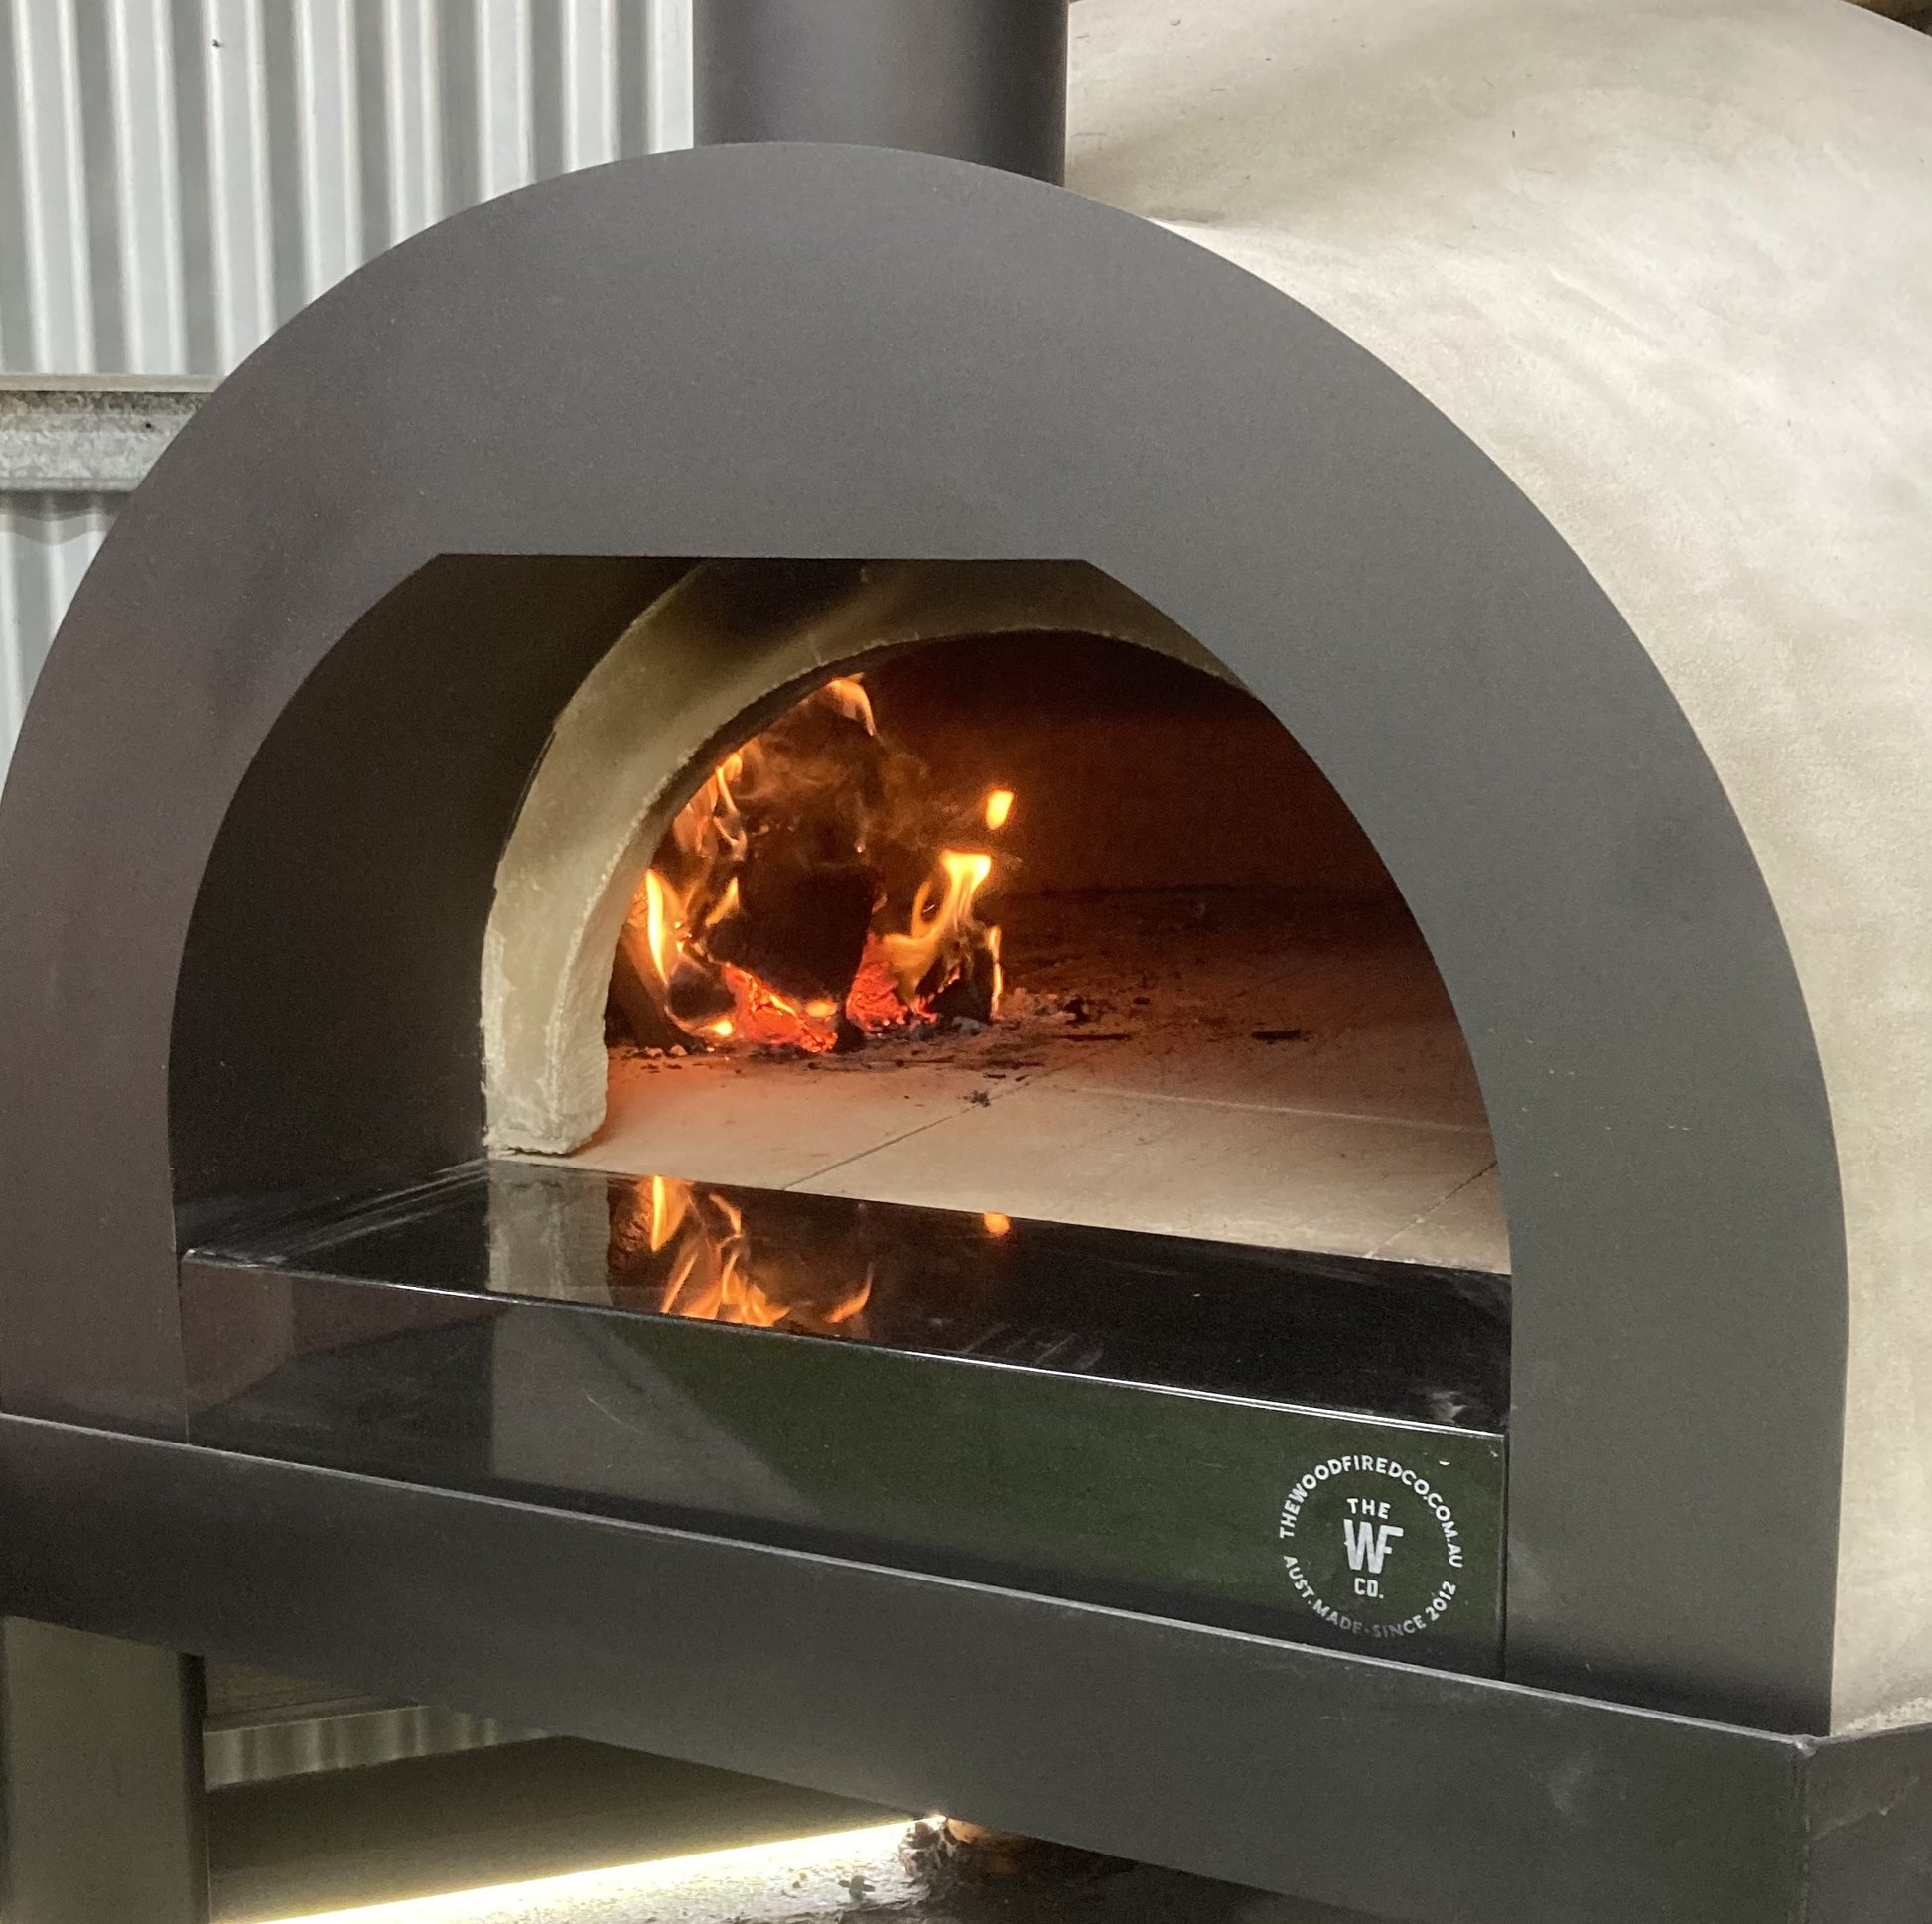 Woodfire oven - The Woodfired Co